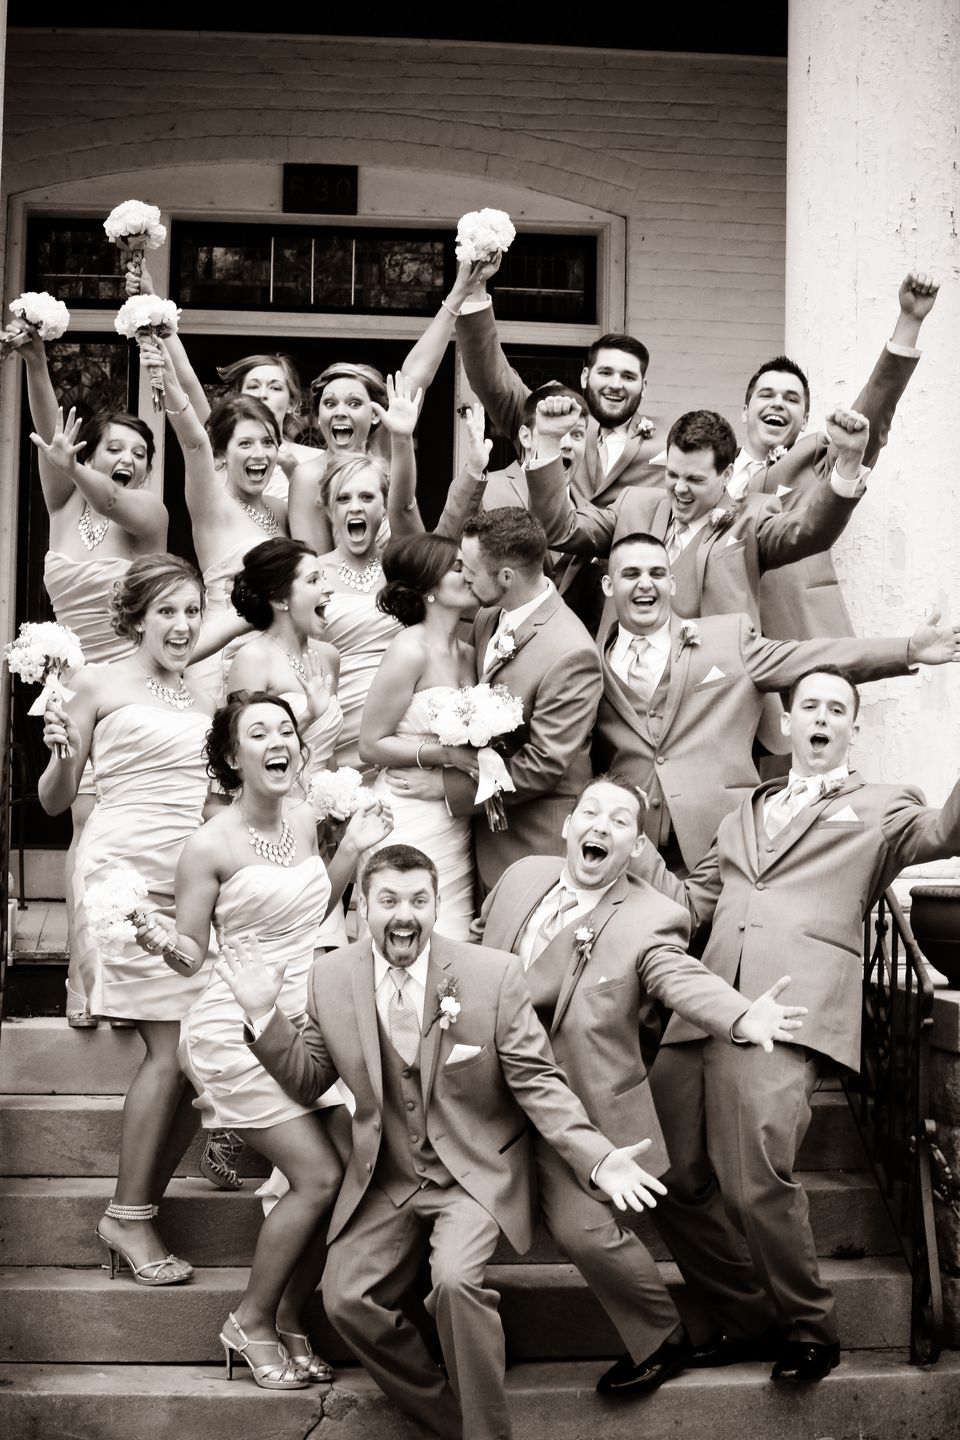 Exciting Wedding Party Group Picture Ideas